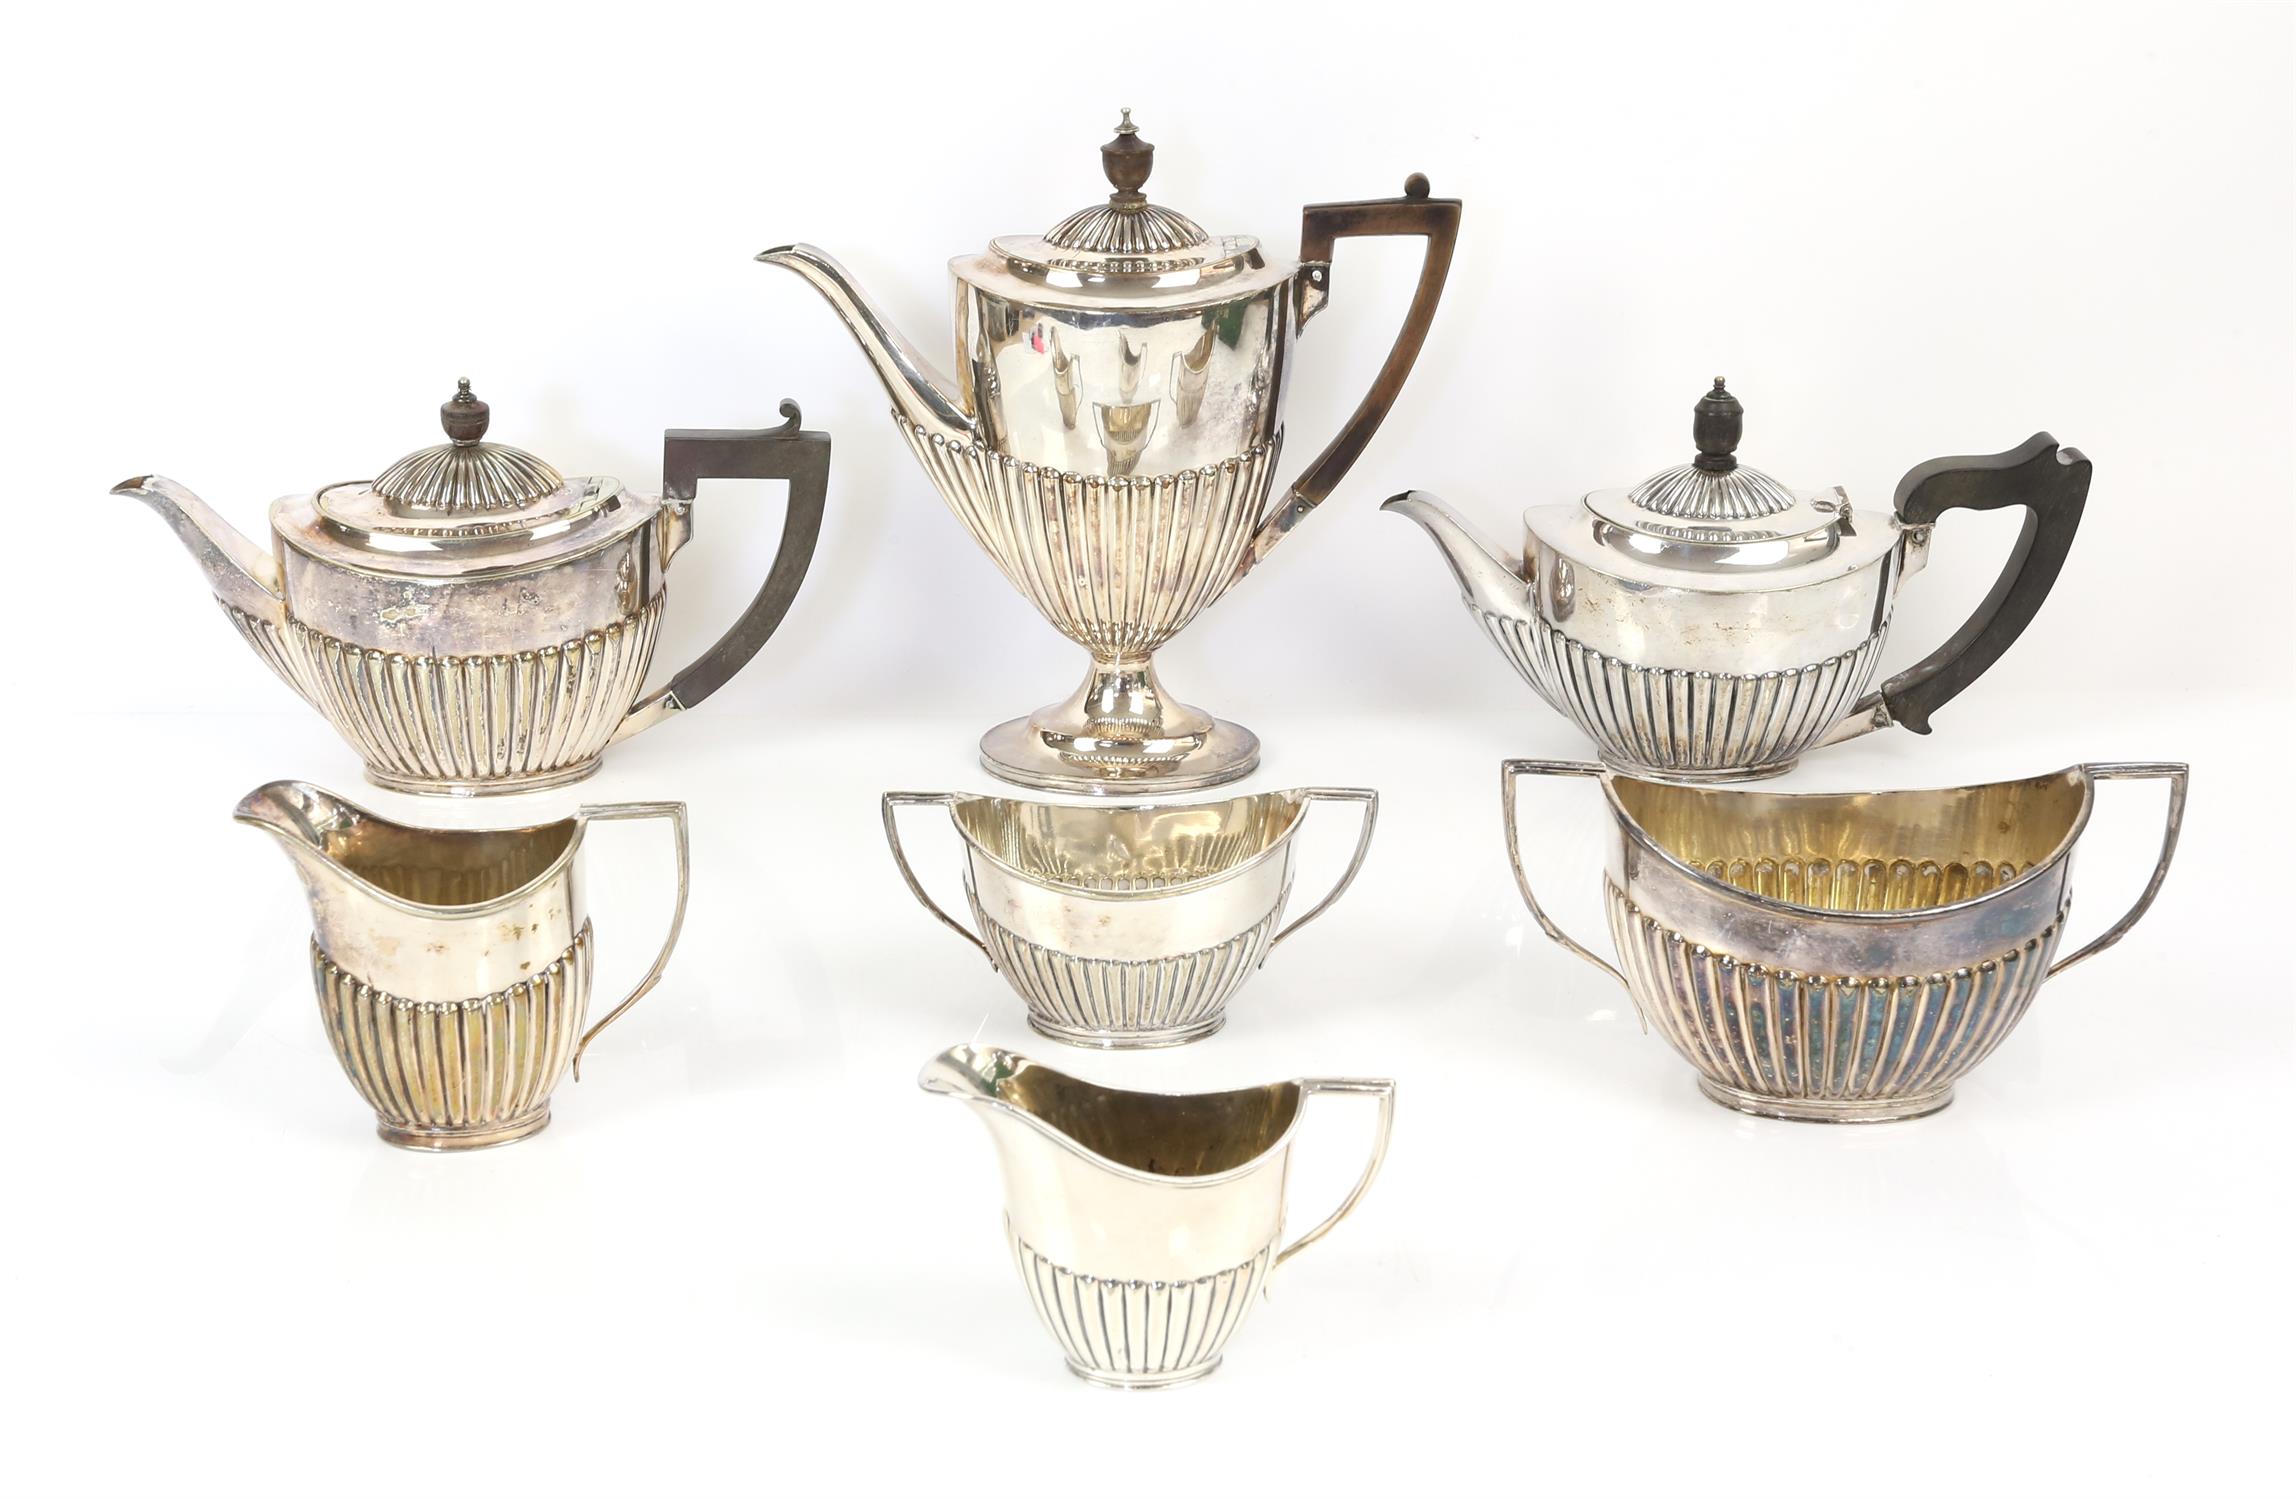 Four piece silver plated tea set and a three piece silver plated tea set both by Goldsmith and